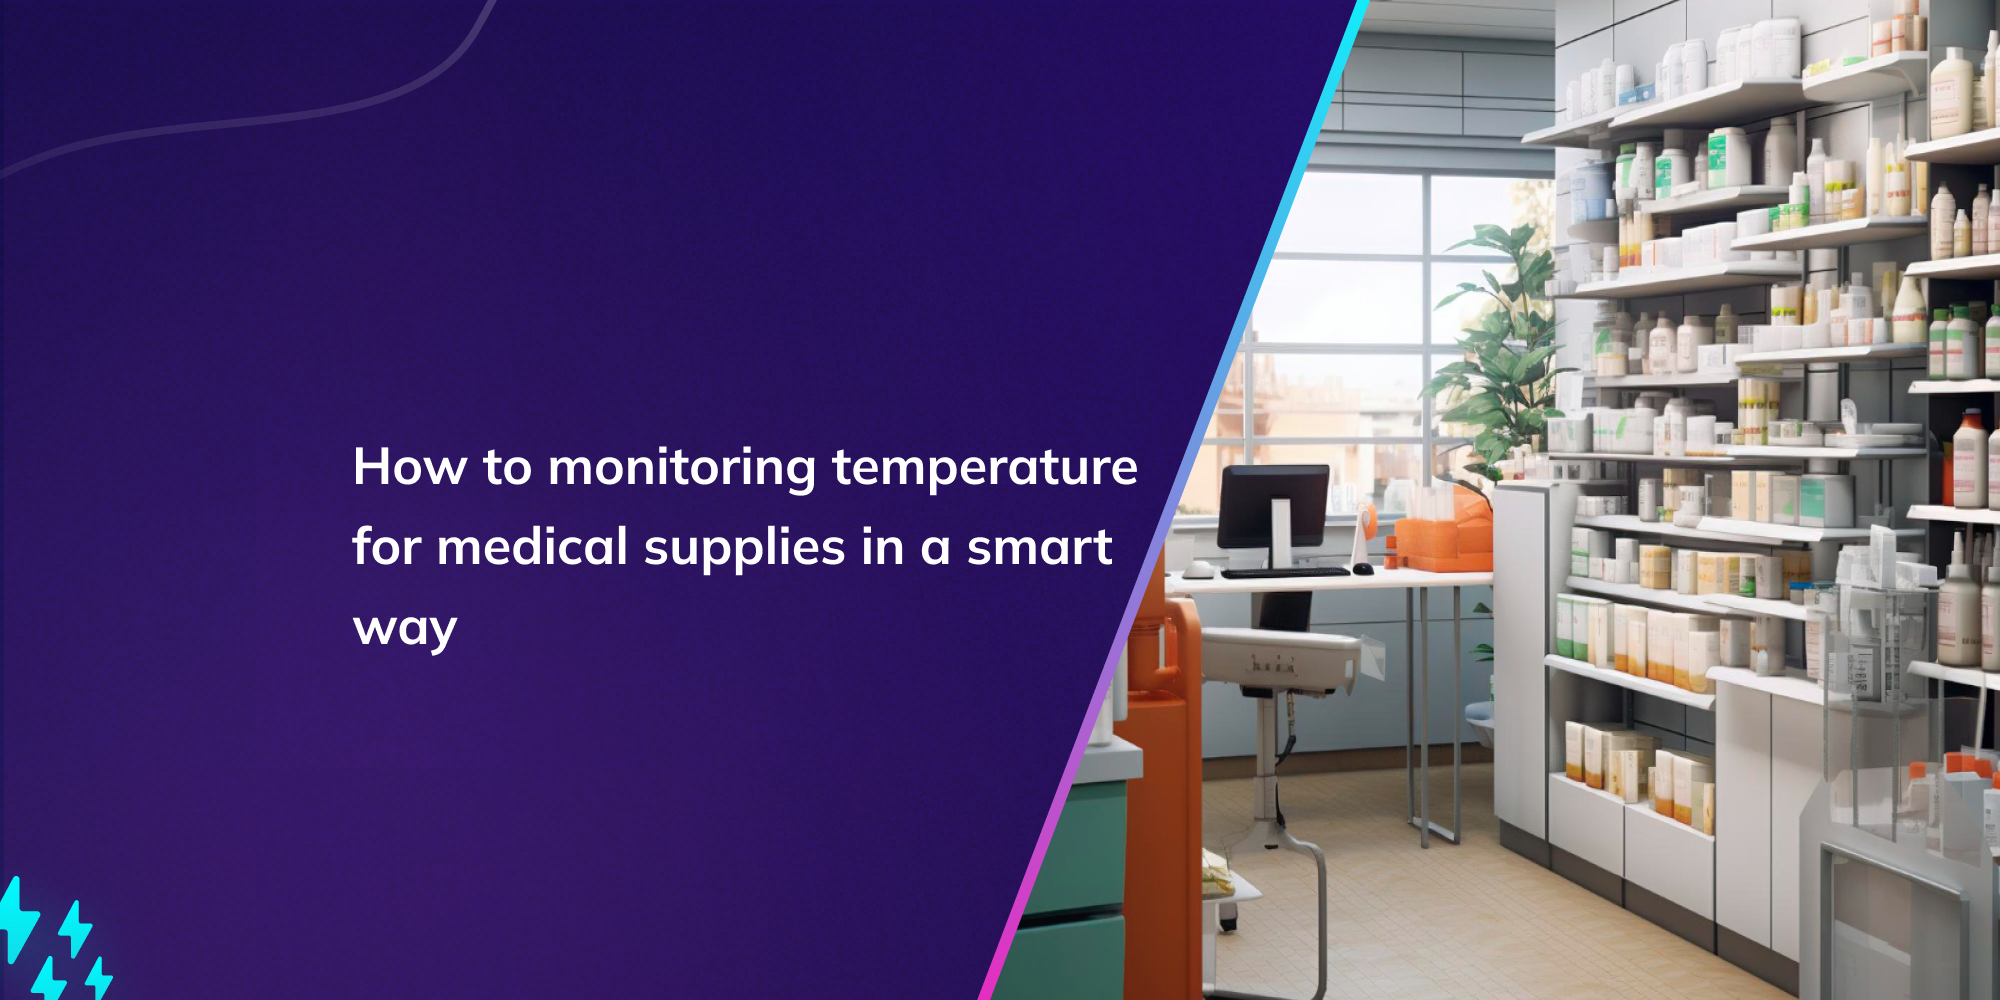 How to monitoring temperature for medical supplies in a smart way